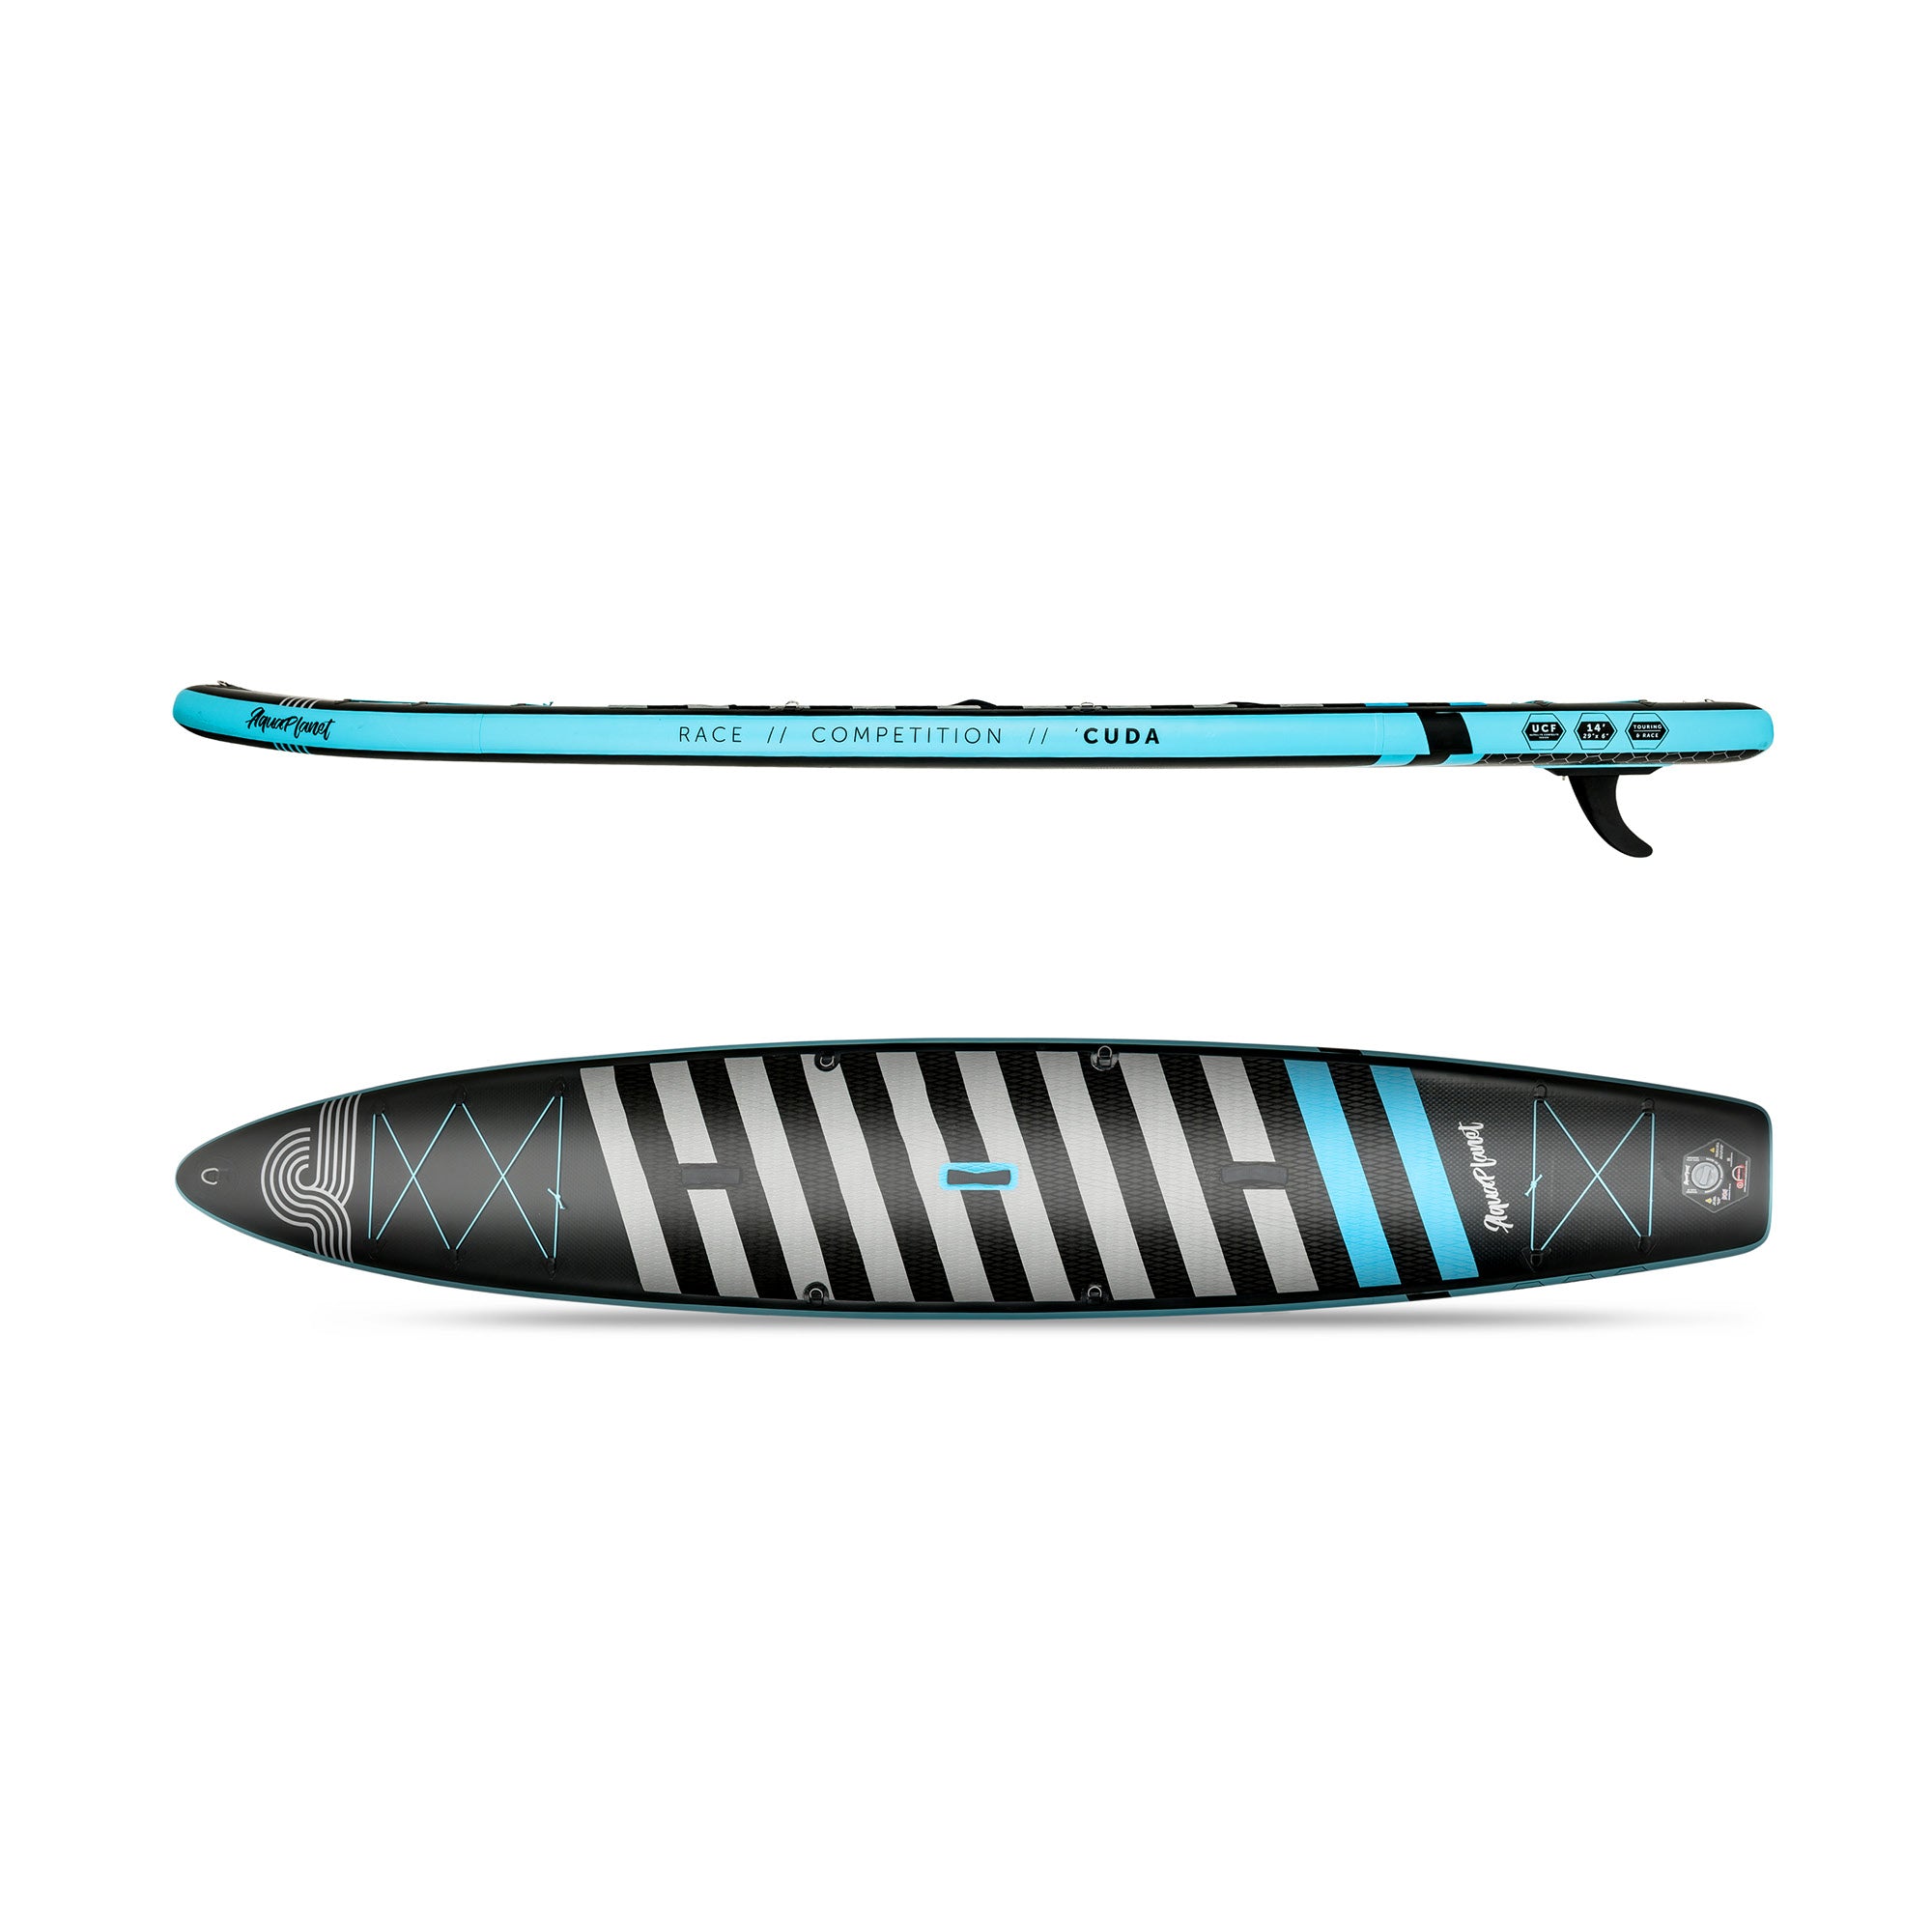 Top View and Side View of the AquaPlanet Cuda 14' iSUP Inflatable Stand Up Paddleboard Set